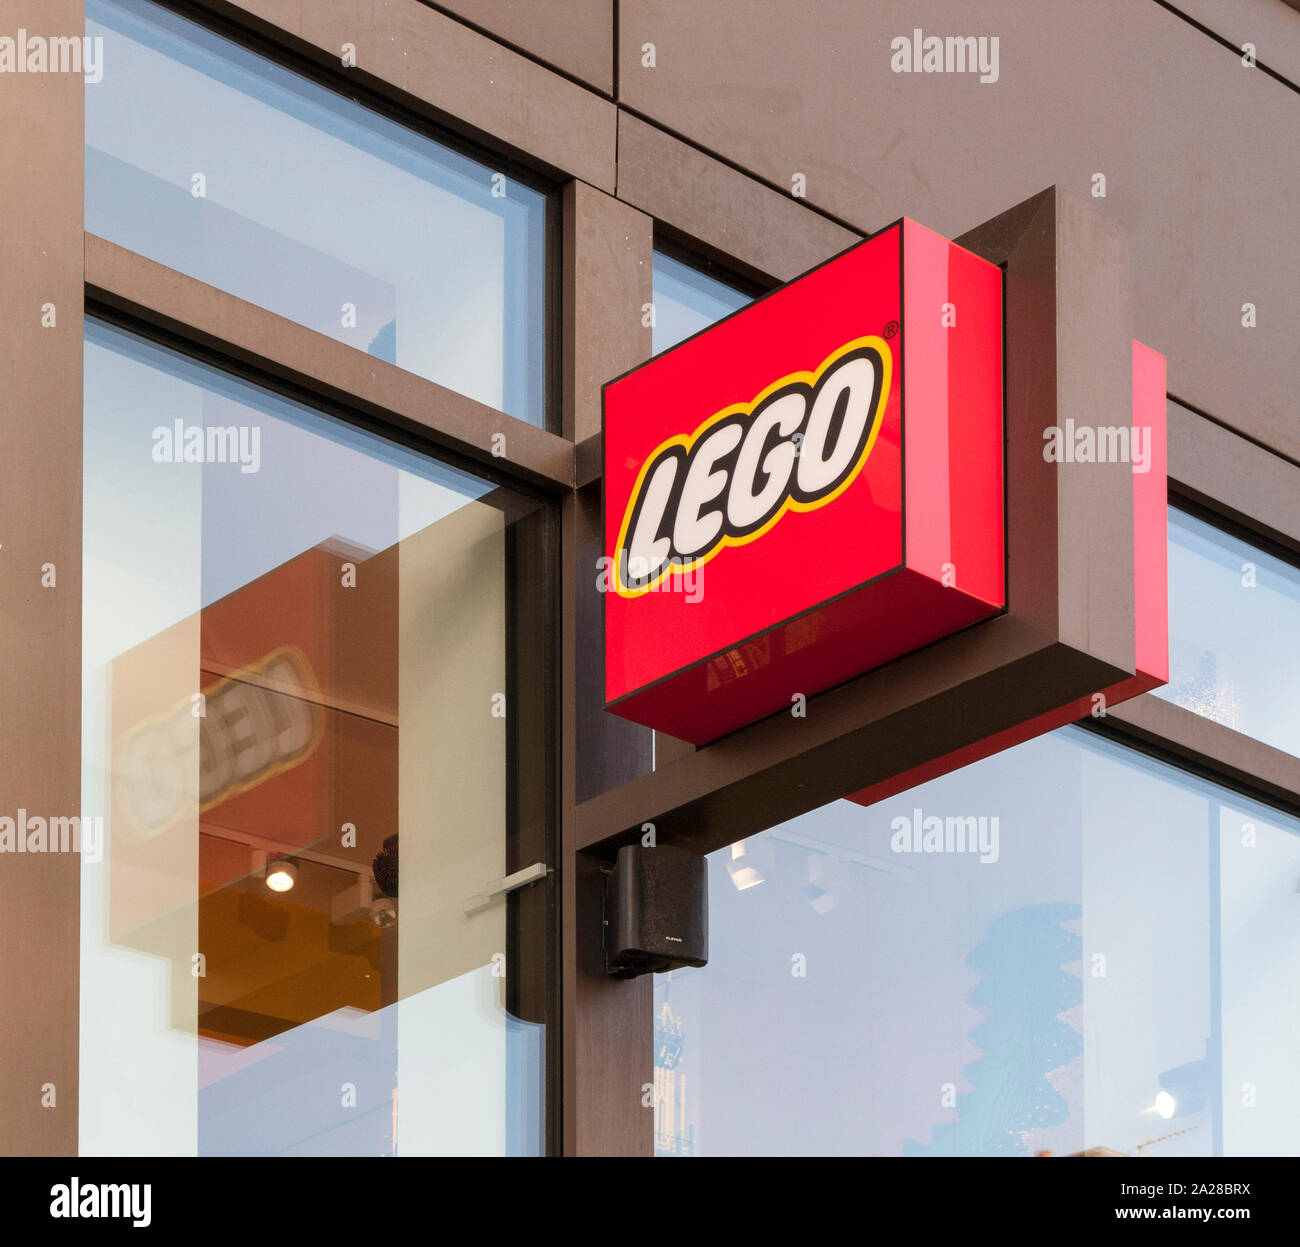 Lego Store, Leicester Square, London Stock Photo